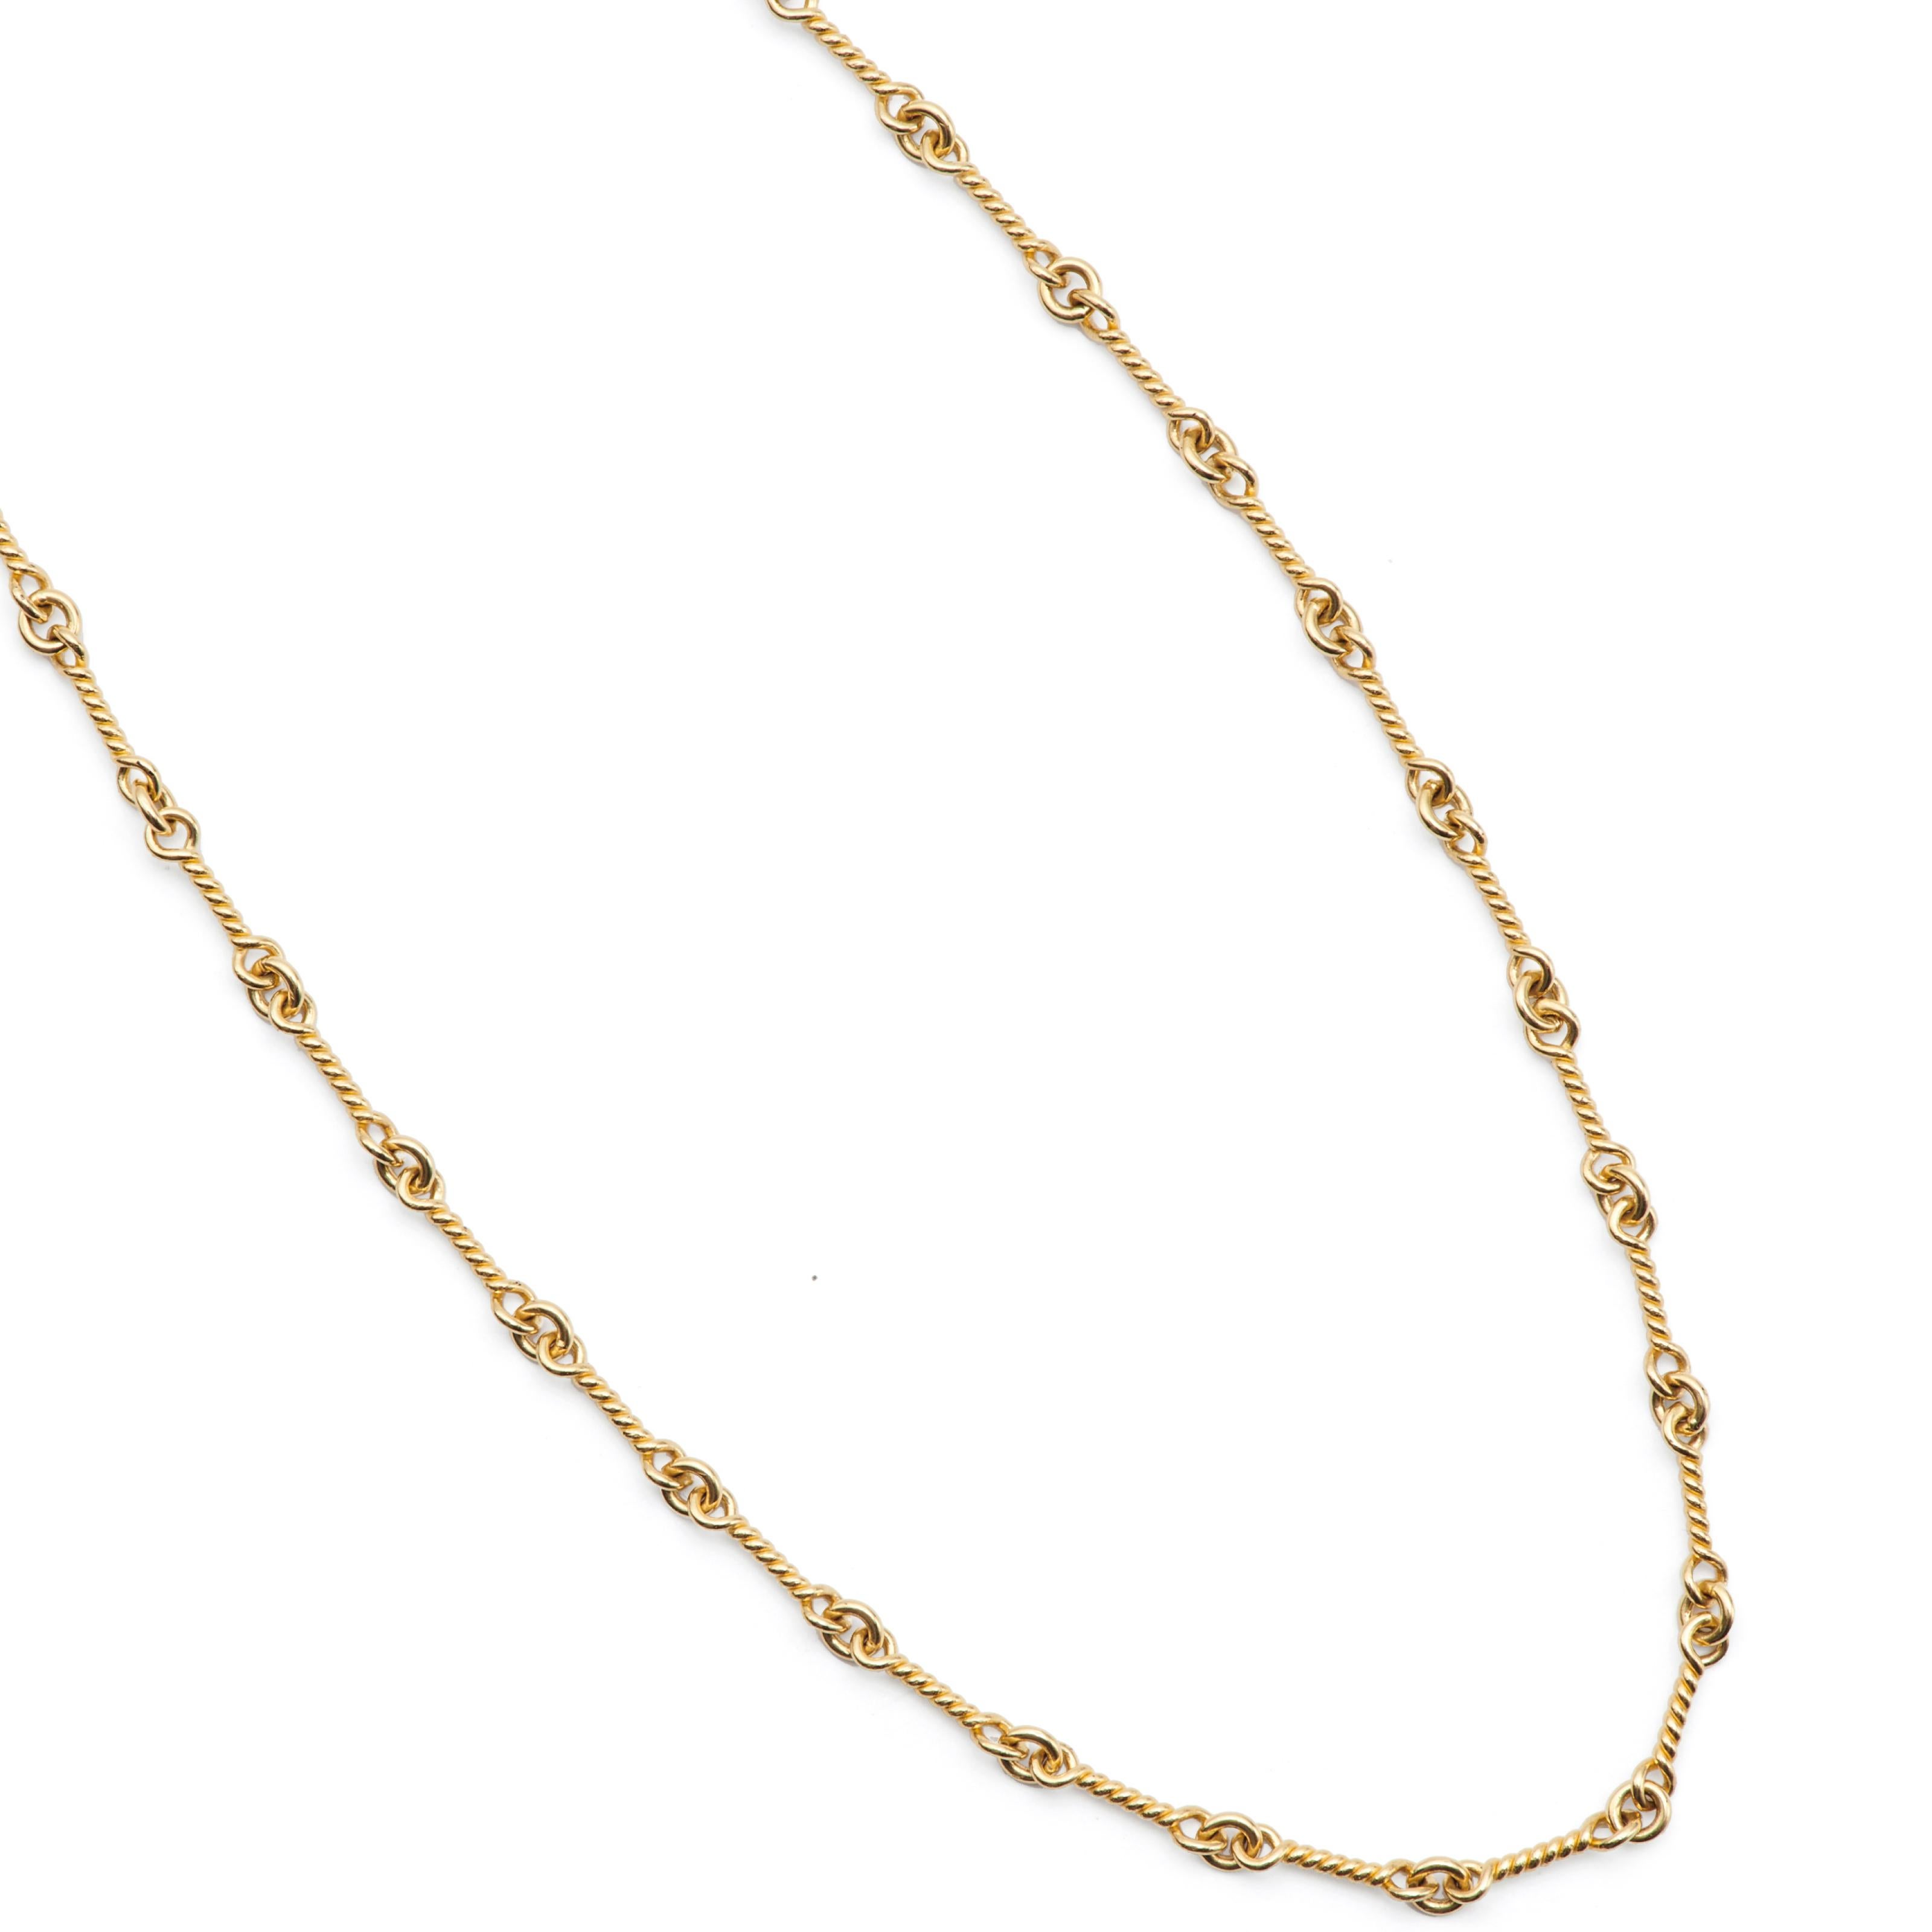 Contemporary Susan Lister Locke Twist Chain in 18kt Gold For Sale